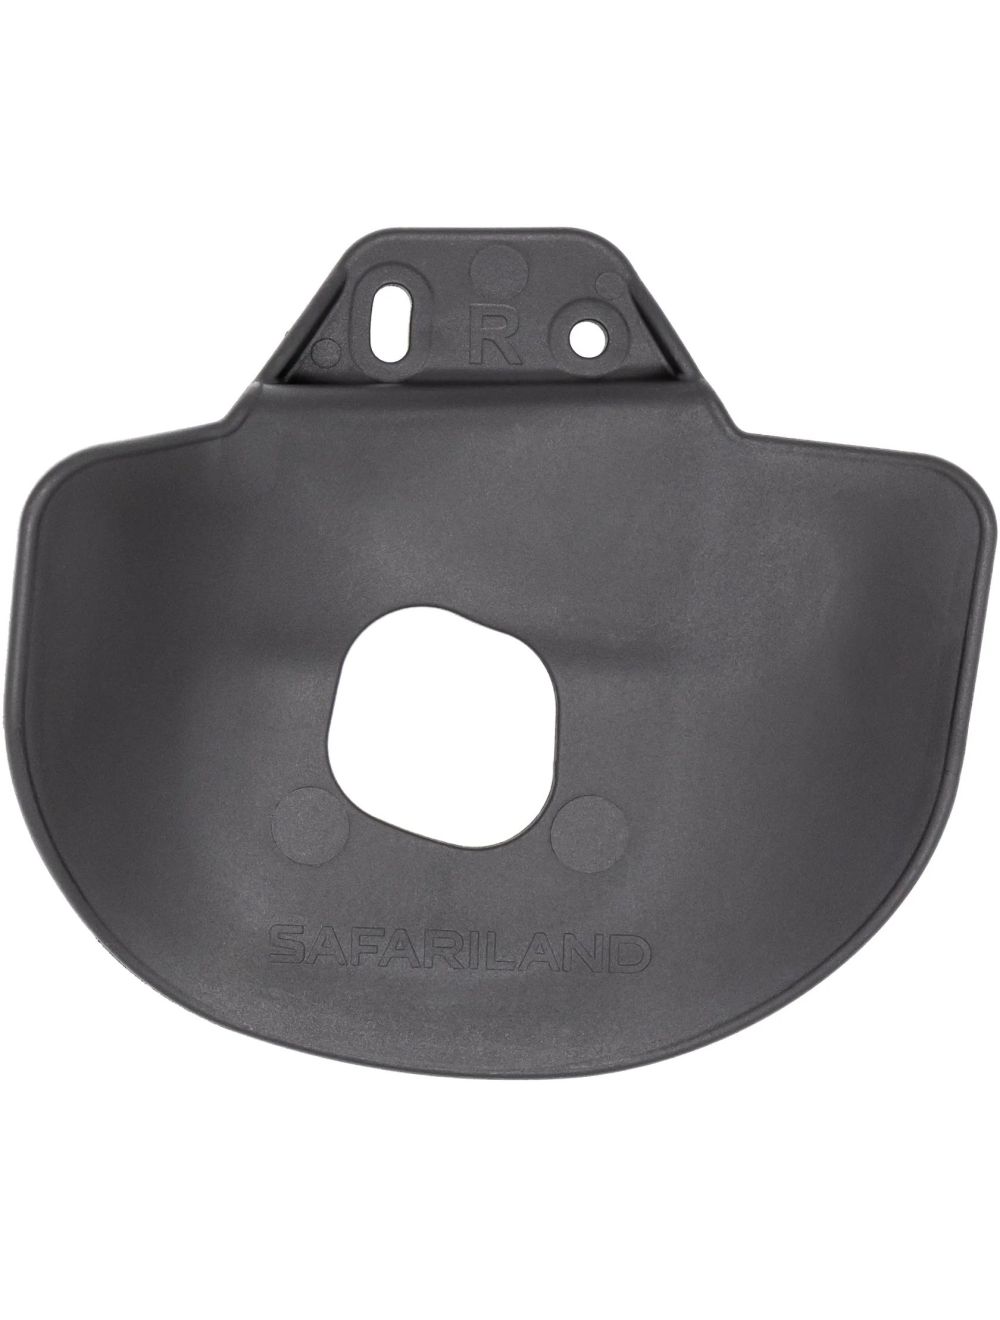 Model 568BL Injection Molded Cantable Paddle for Safariland 3-Hole Pattern Holsters